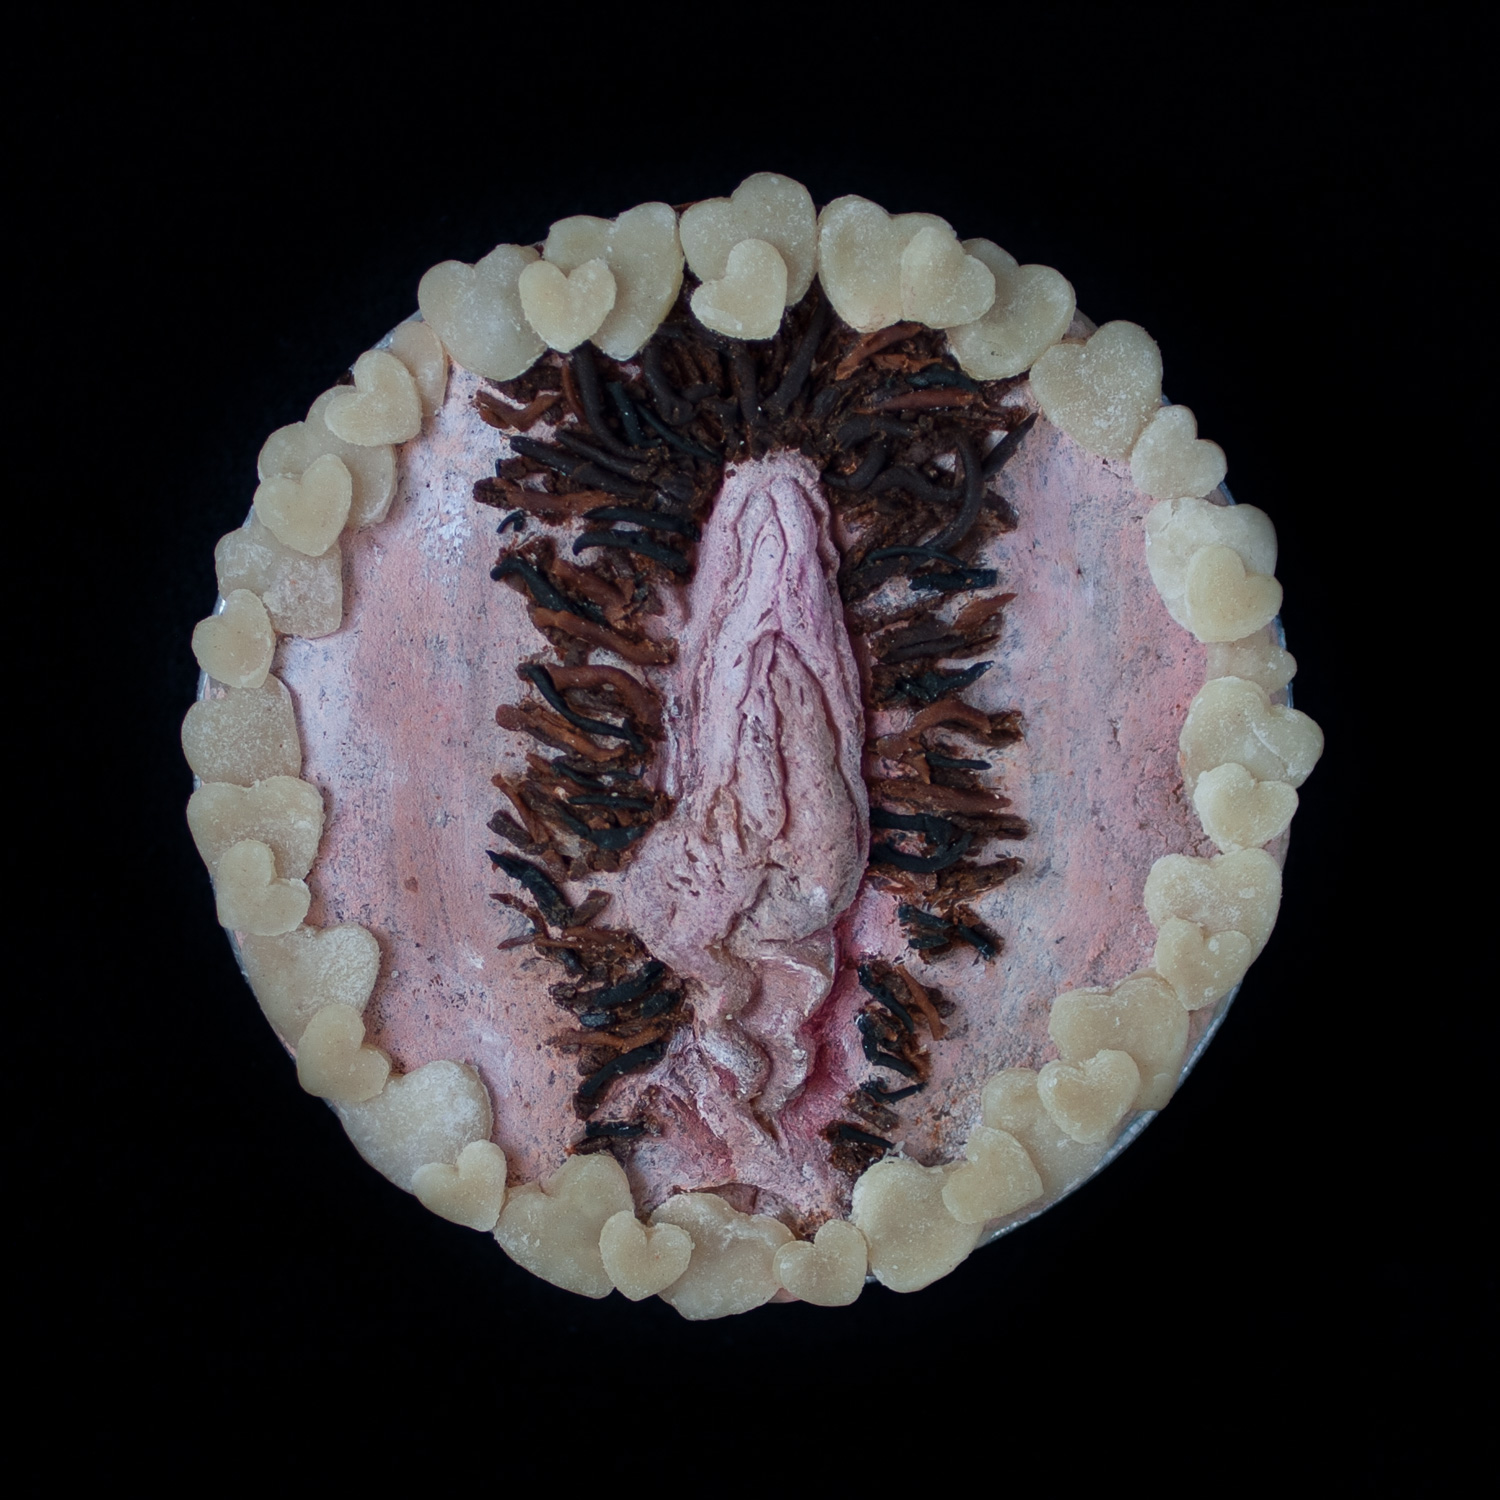 A vulva pie on a black background. The pie has brown pubic hair and is surrounded my pie crust hearts. The vulva art is painted to look like a realistic vulva.